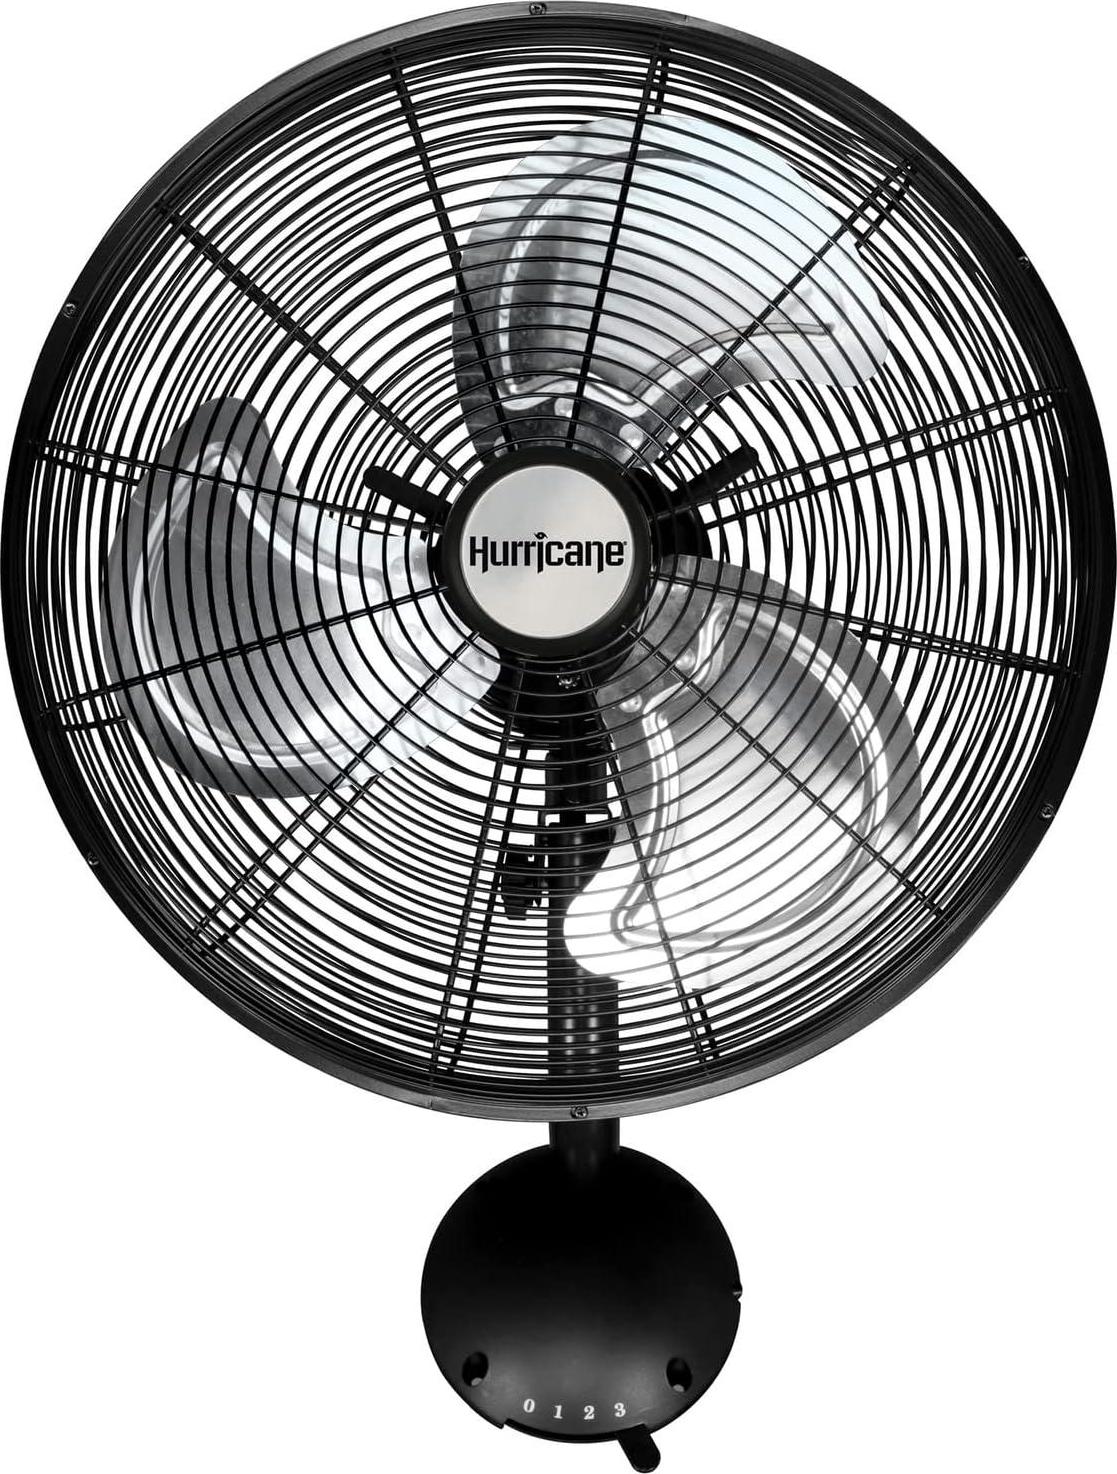 Wall Mount Fan - 16 Inch, Pro Series, High Velocity, Heavy Duty Metal Wall Mount Fan for Industrial, Commercial, Residential, and Greenhouse Use - ETL Listed, Black